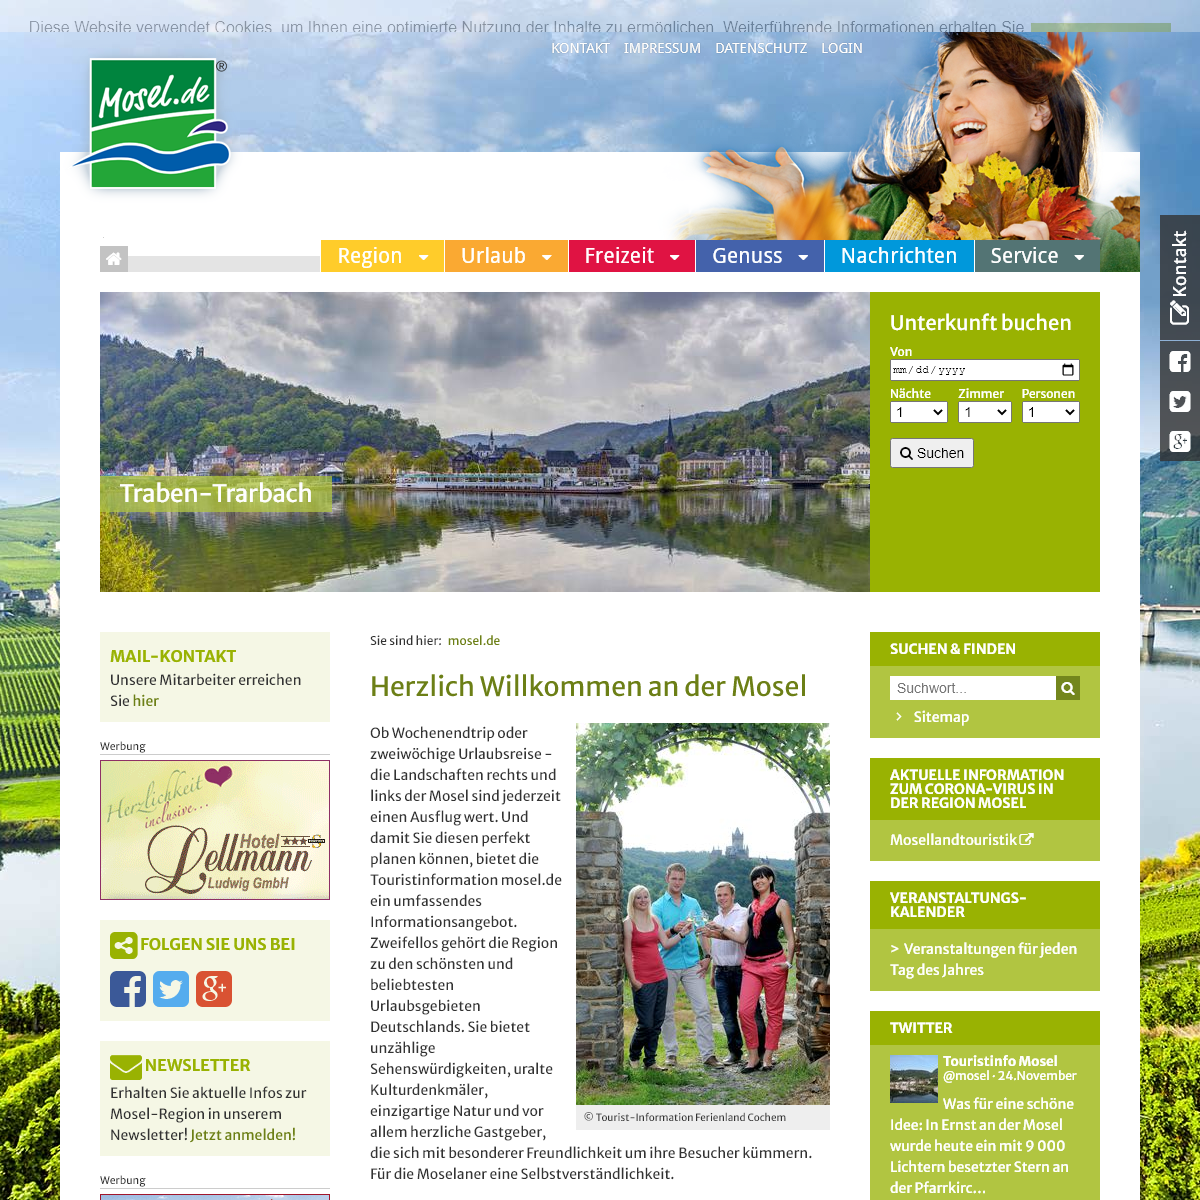 A complete backup of mosel.de